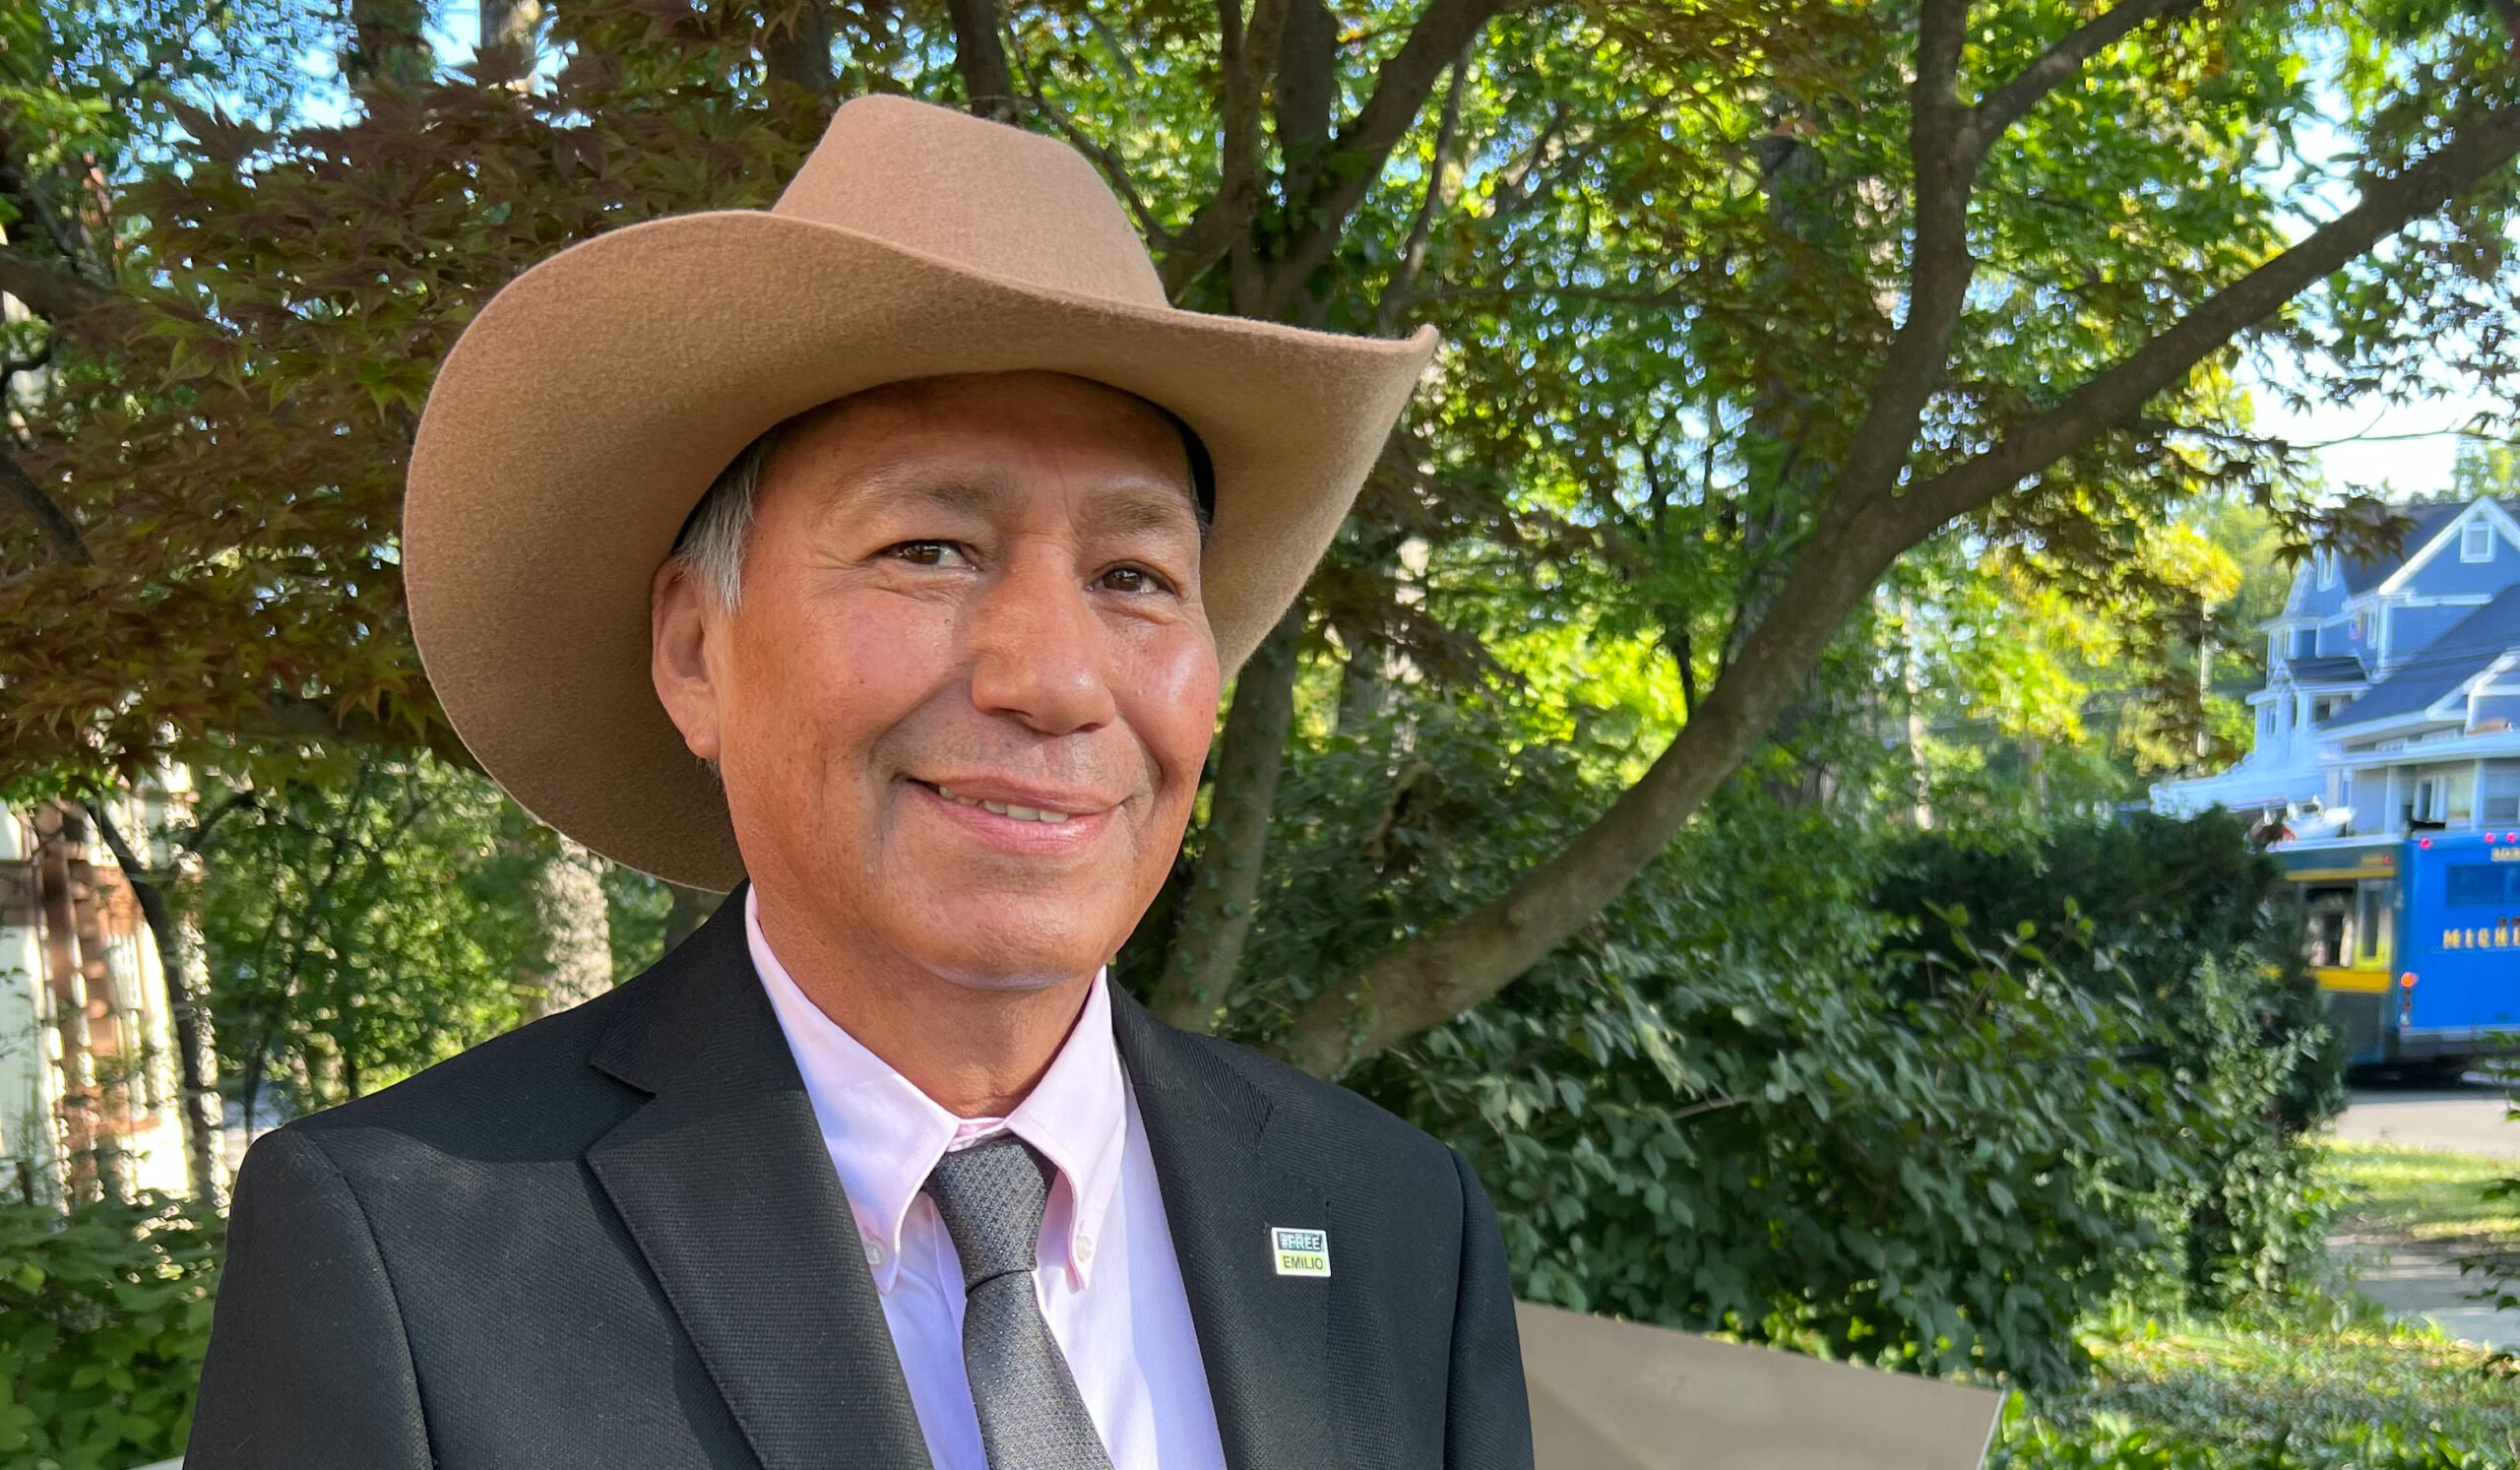 Emilio Gutiérrez Soto, wearing a suit and a cowboy hat, smiles with trees in the background.